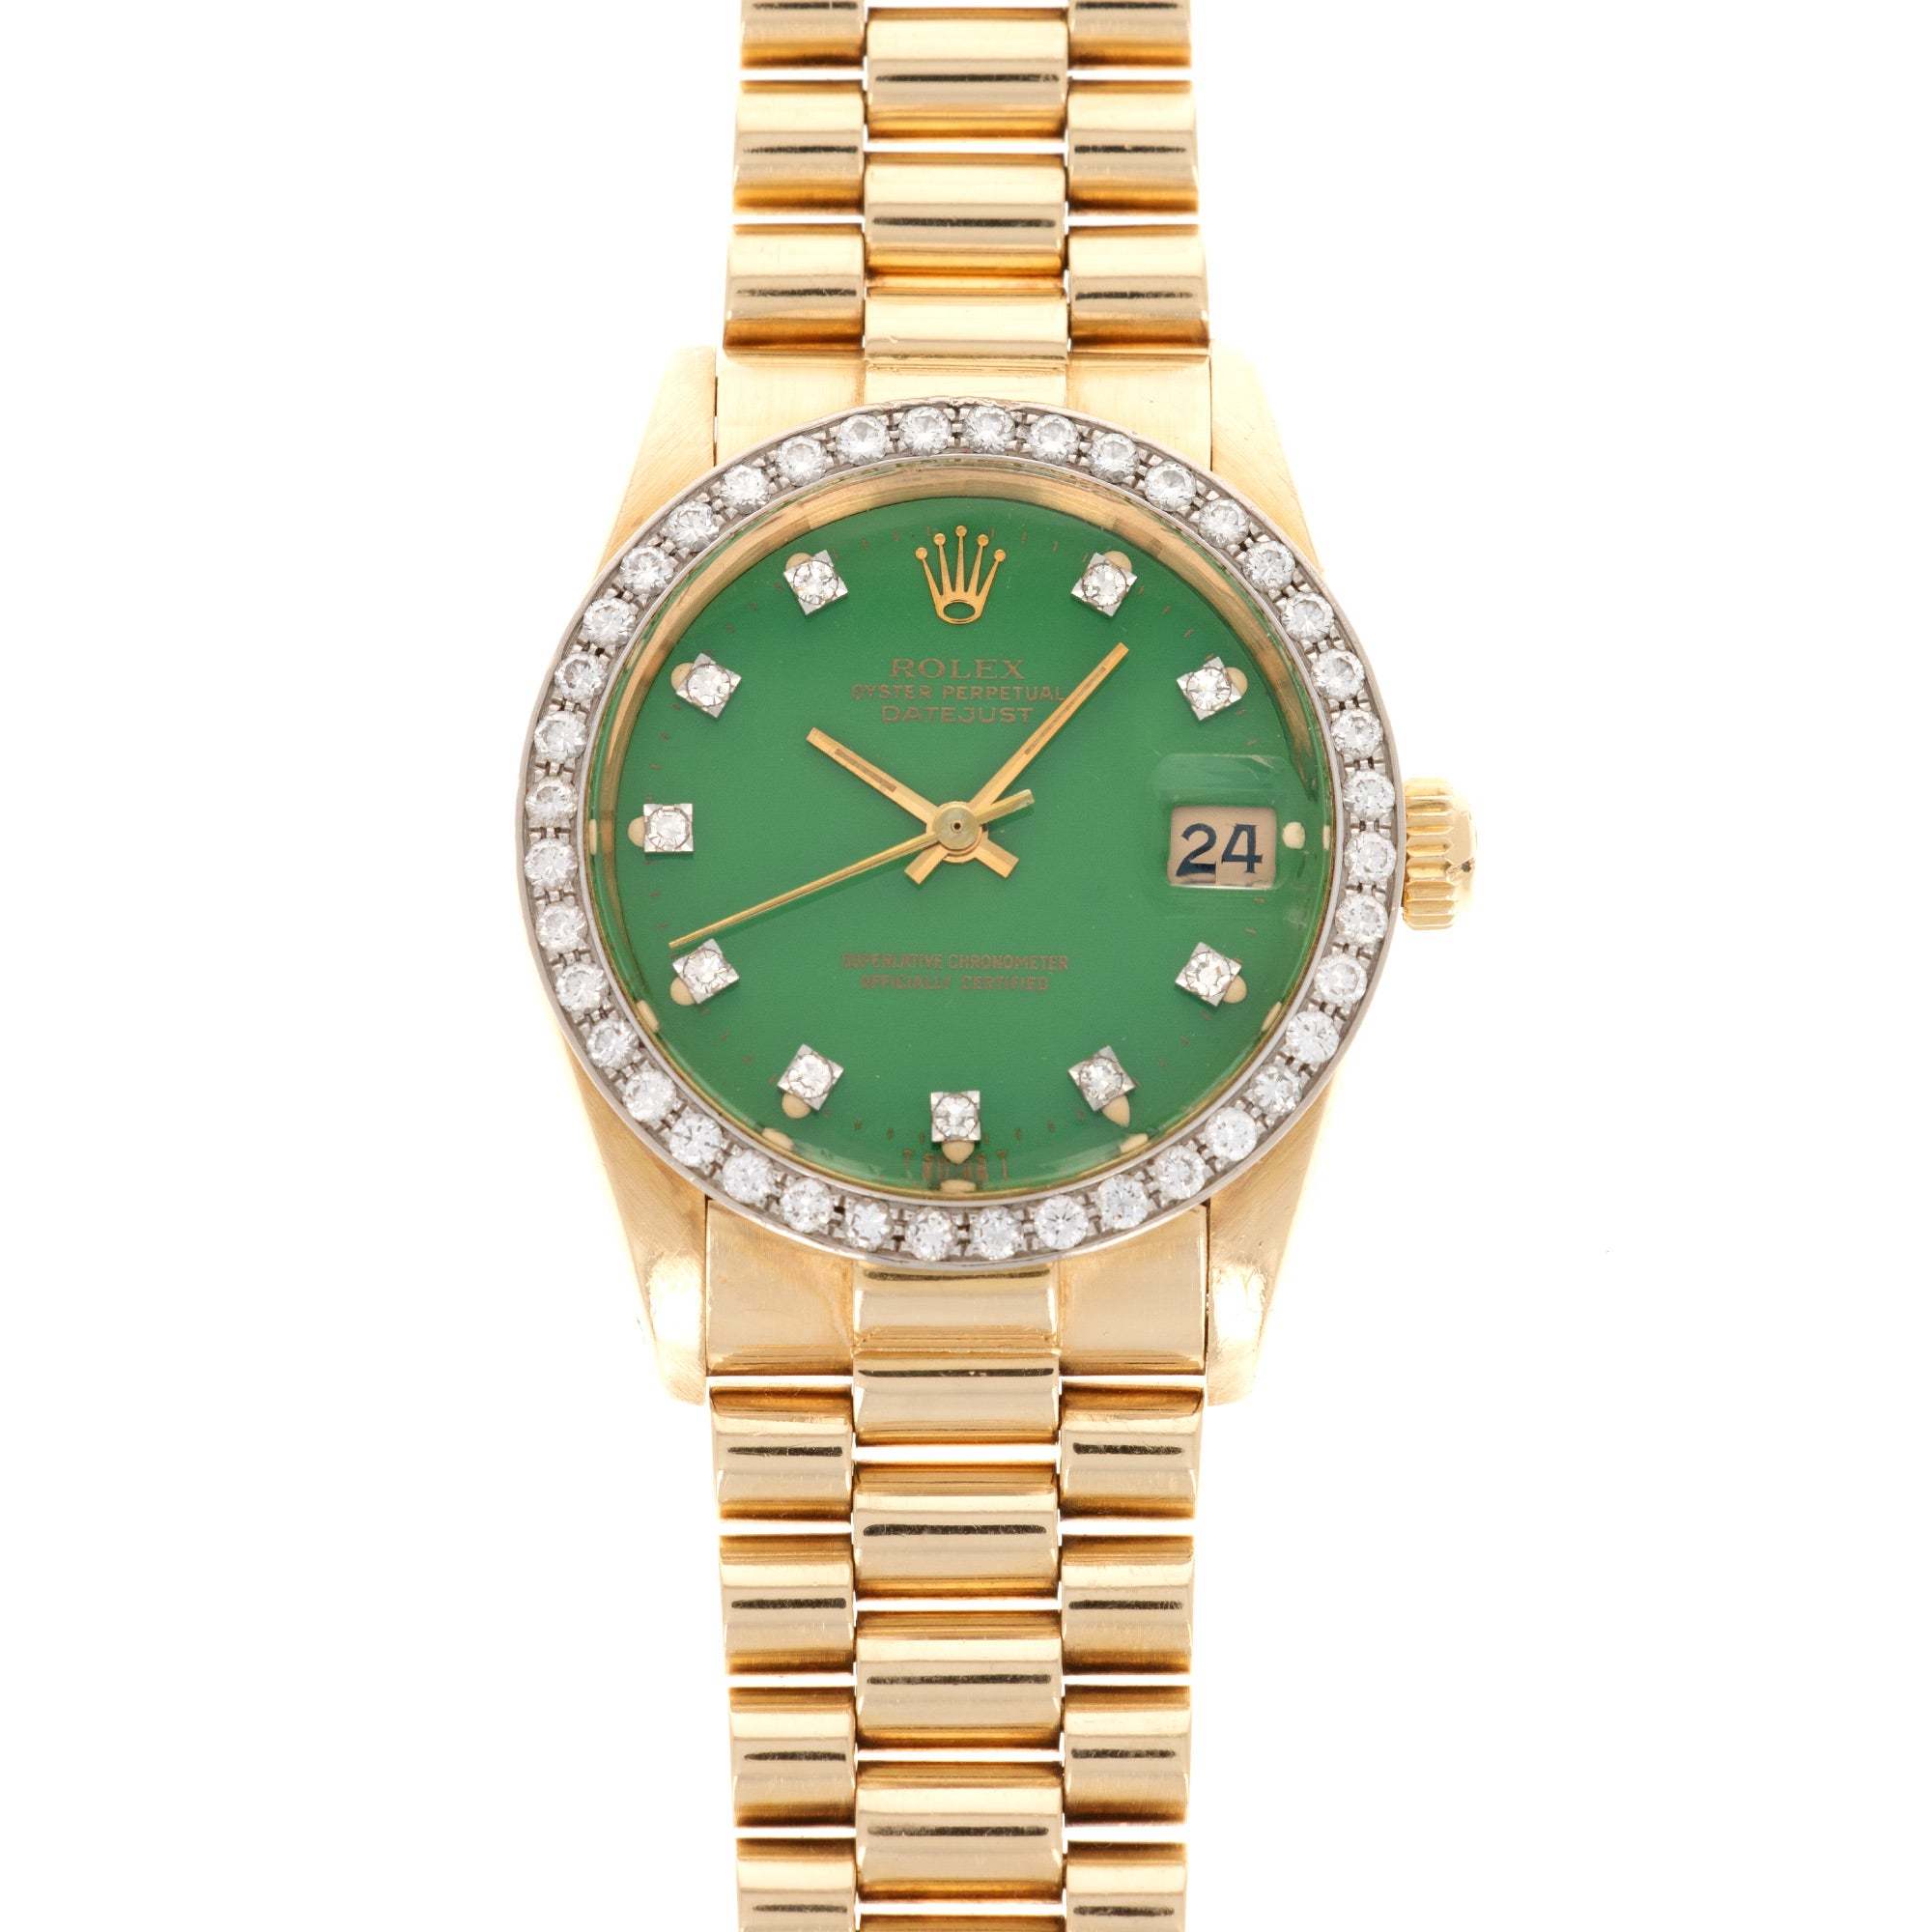 Rolex - Rolex Midsize Datejust Ref. 6828 with Green Stella Dial - The Keystone Watches